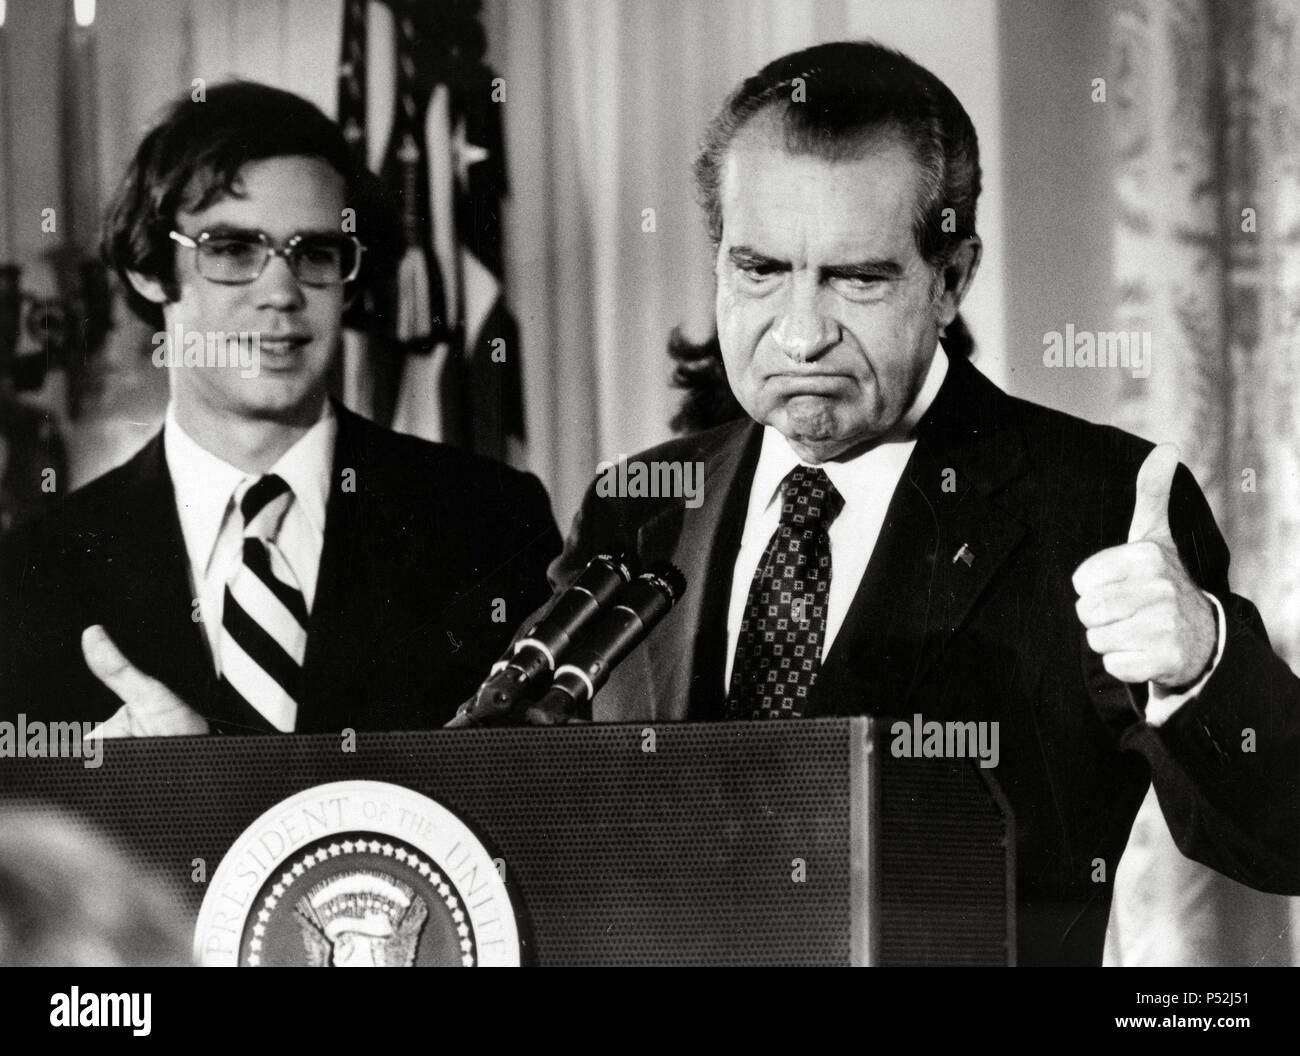 Richard Nixon's resignation. Richard Nixon saying goodbye to members of his staff and cabinet in White House, after resigning from office. Stock Photo